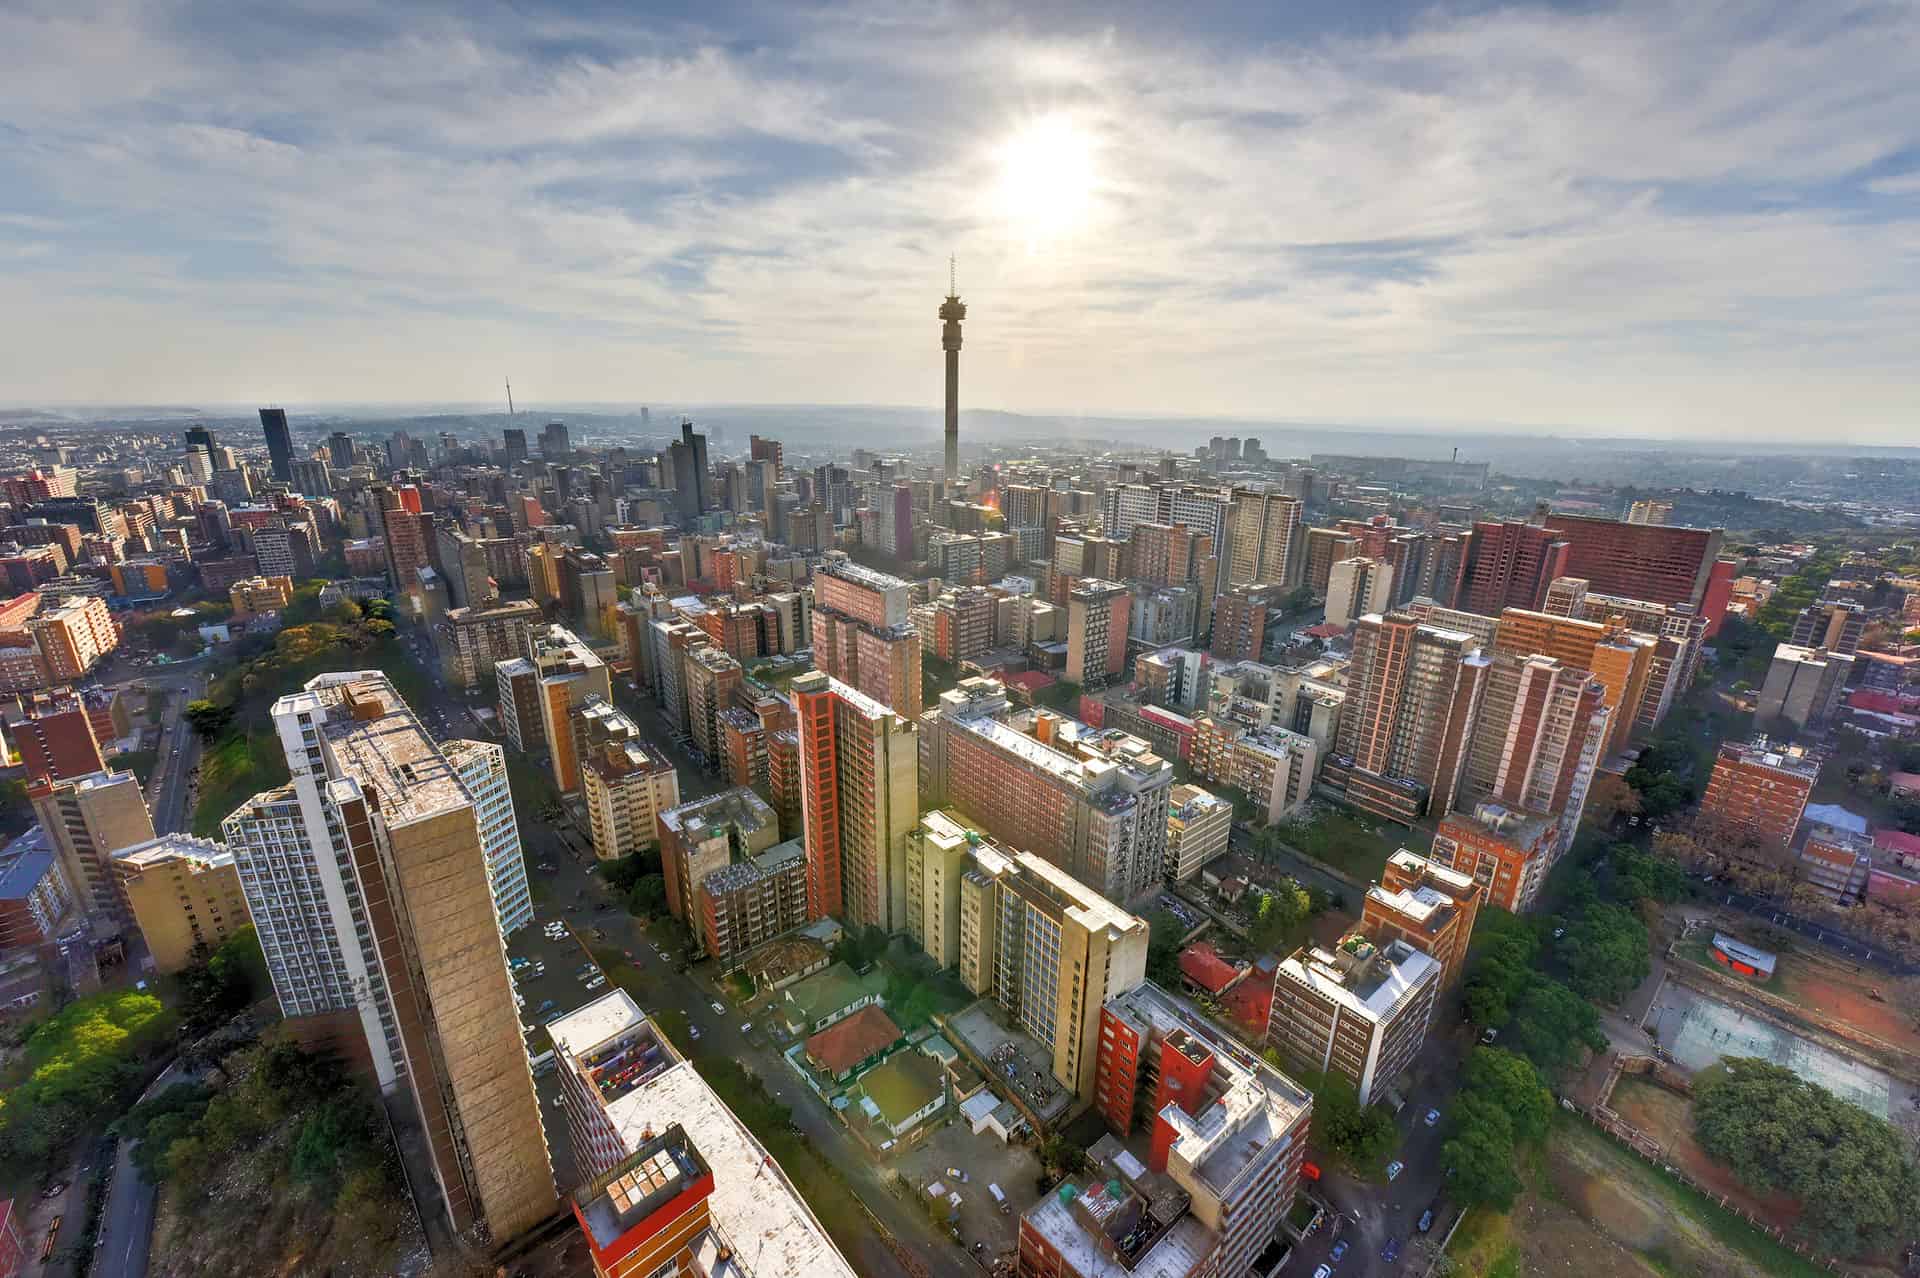 An aerial view of Johannesburg, South Africa